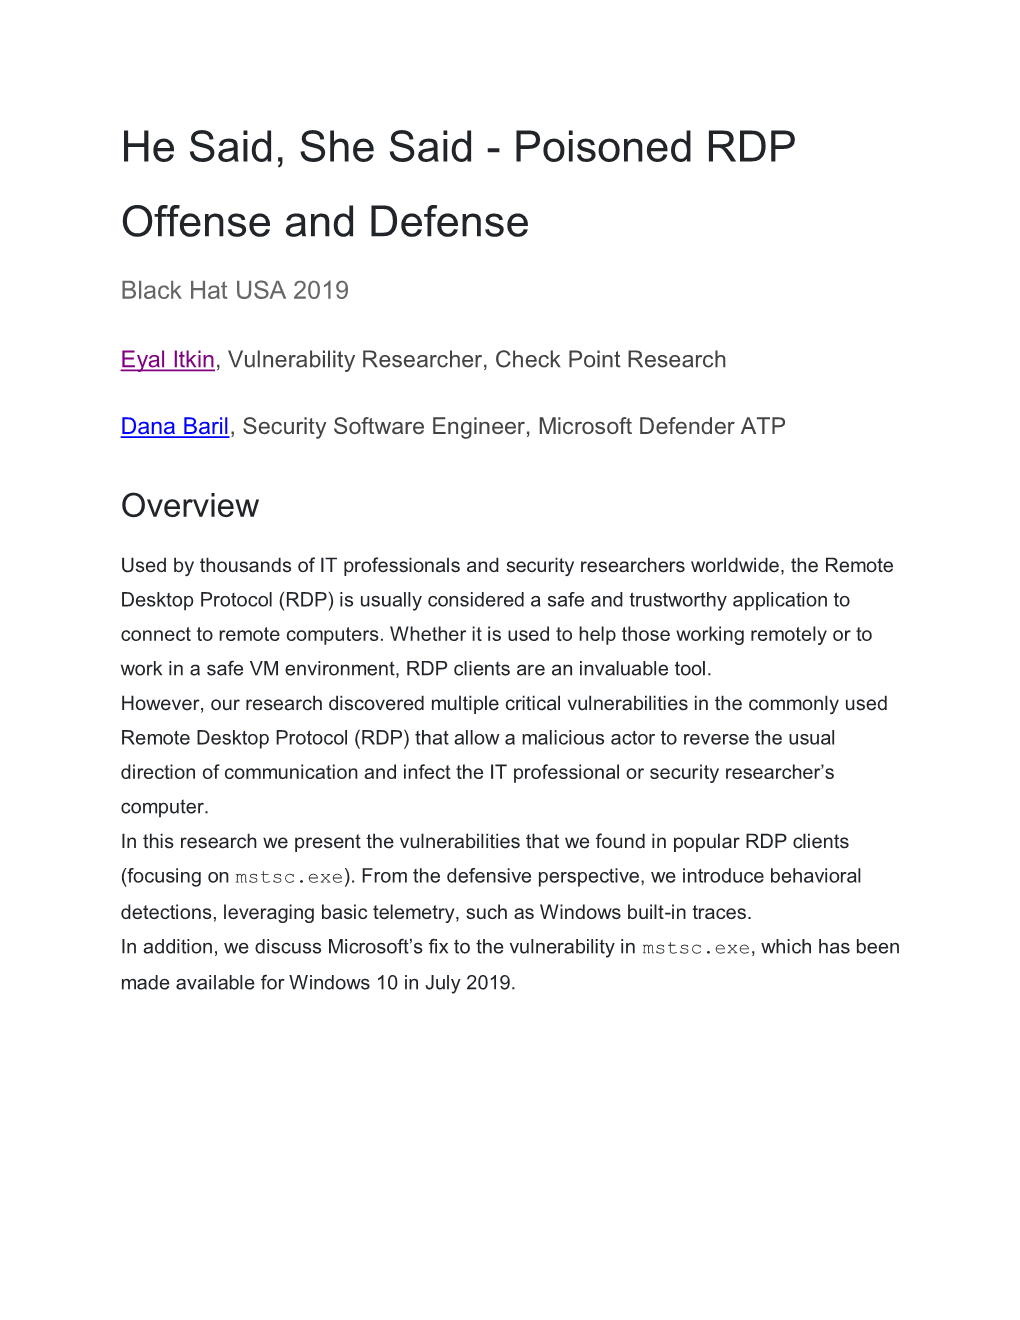 Poisoned RDP Offense and Defense